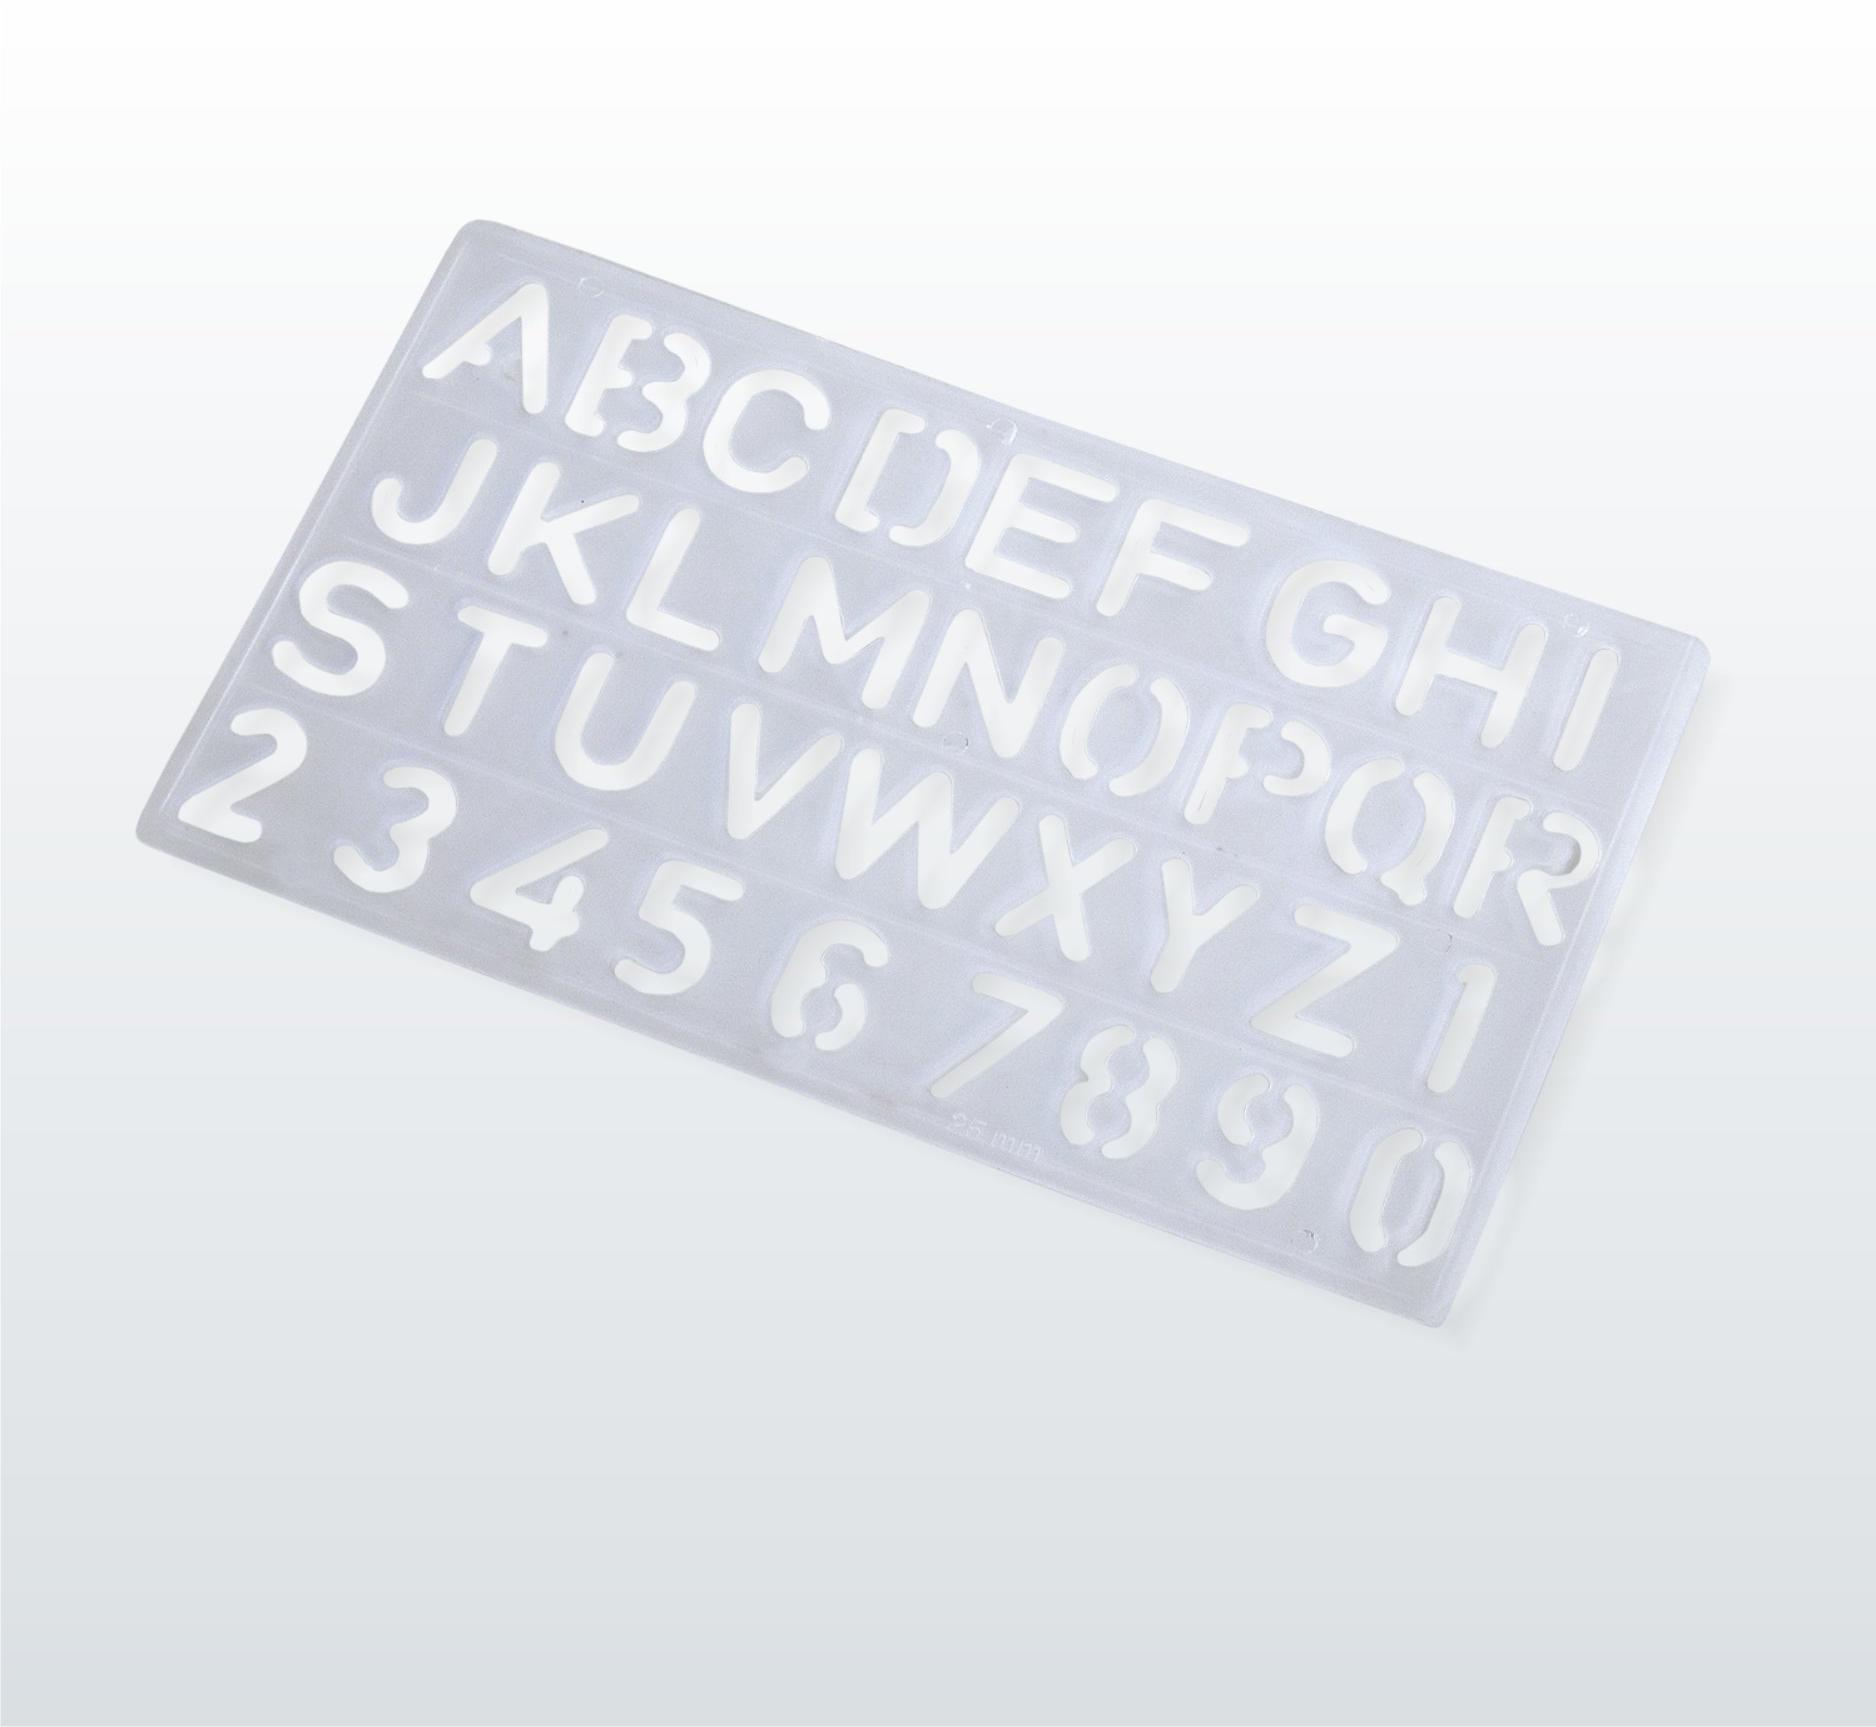  Old English Letter Stencils 10mm, Lettering Stencils